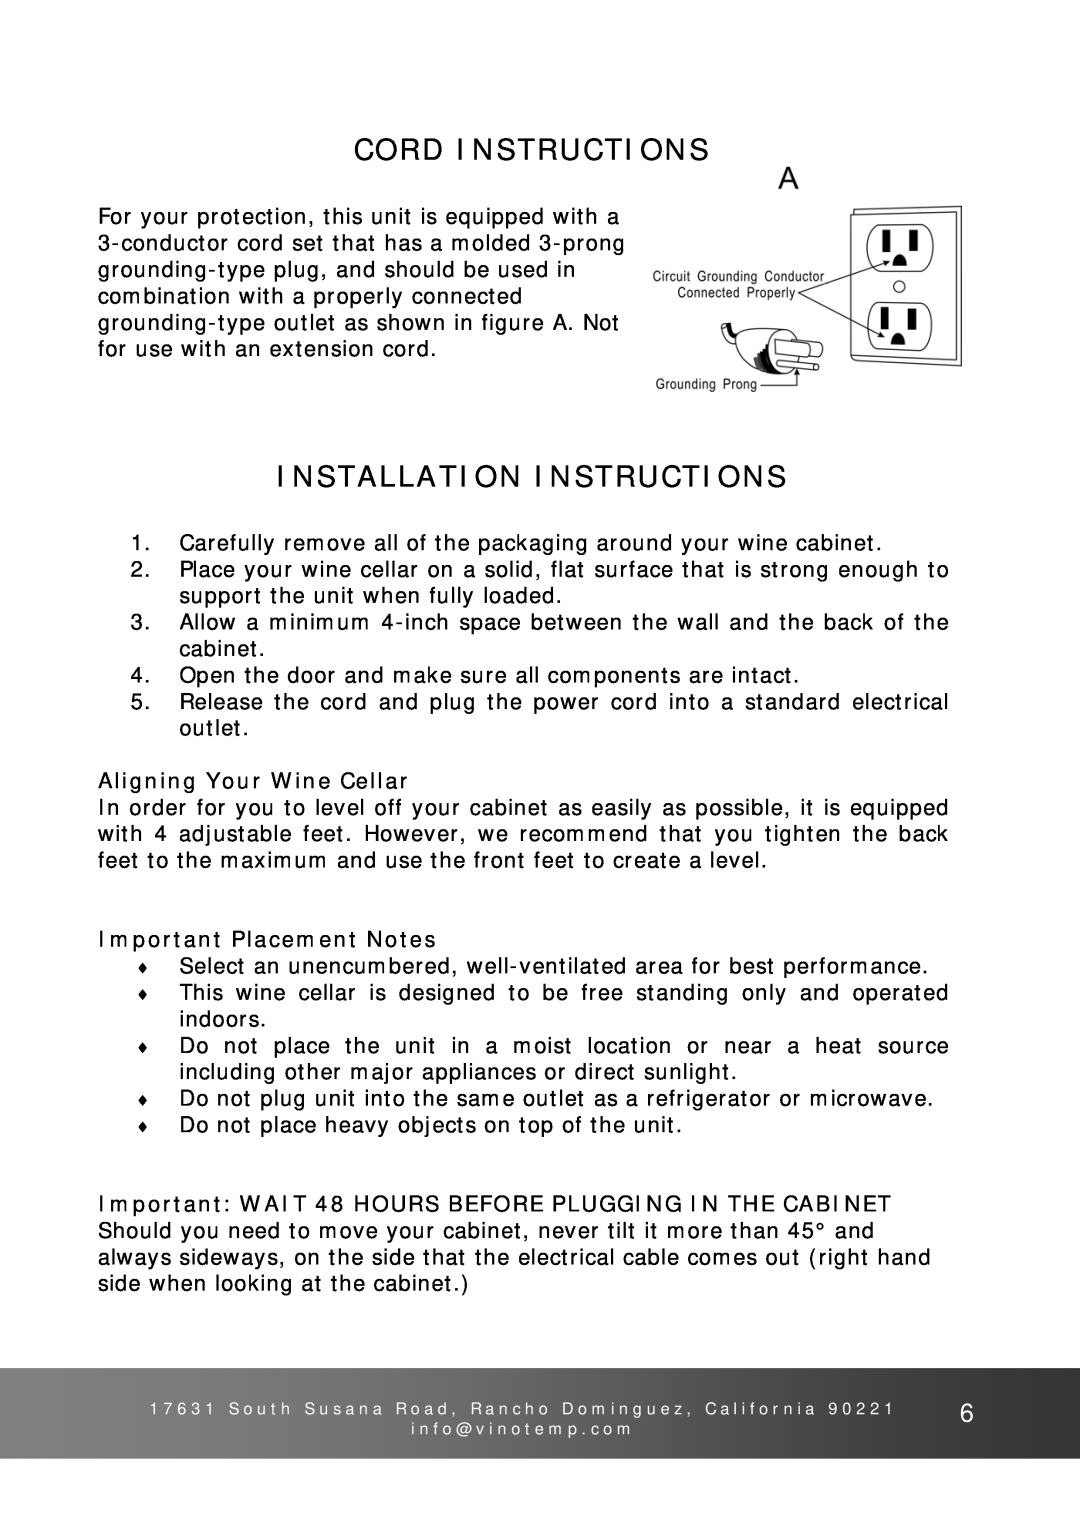 Vinotemp VinoCellier Cord Instructions, Installation Instructions, Aligning Your Wine Cellar, Important Placement Notes 